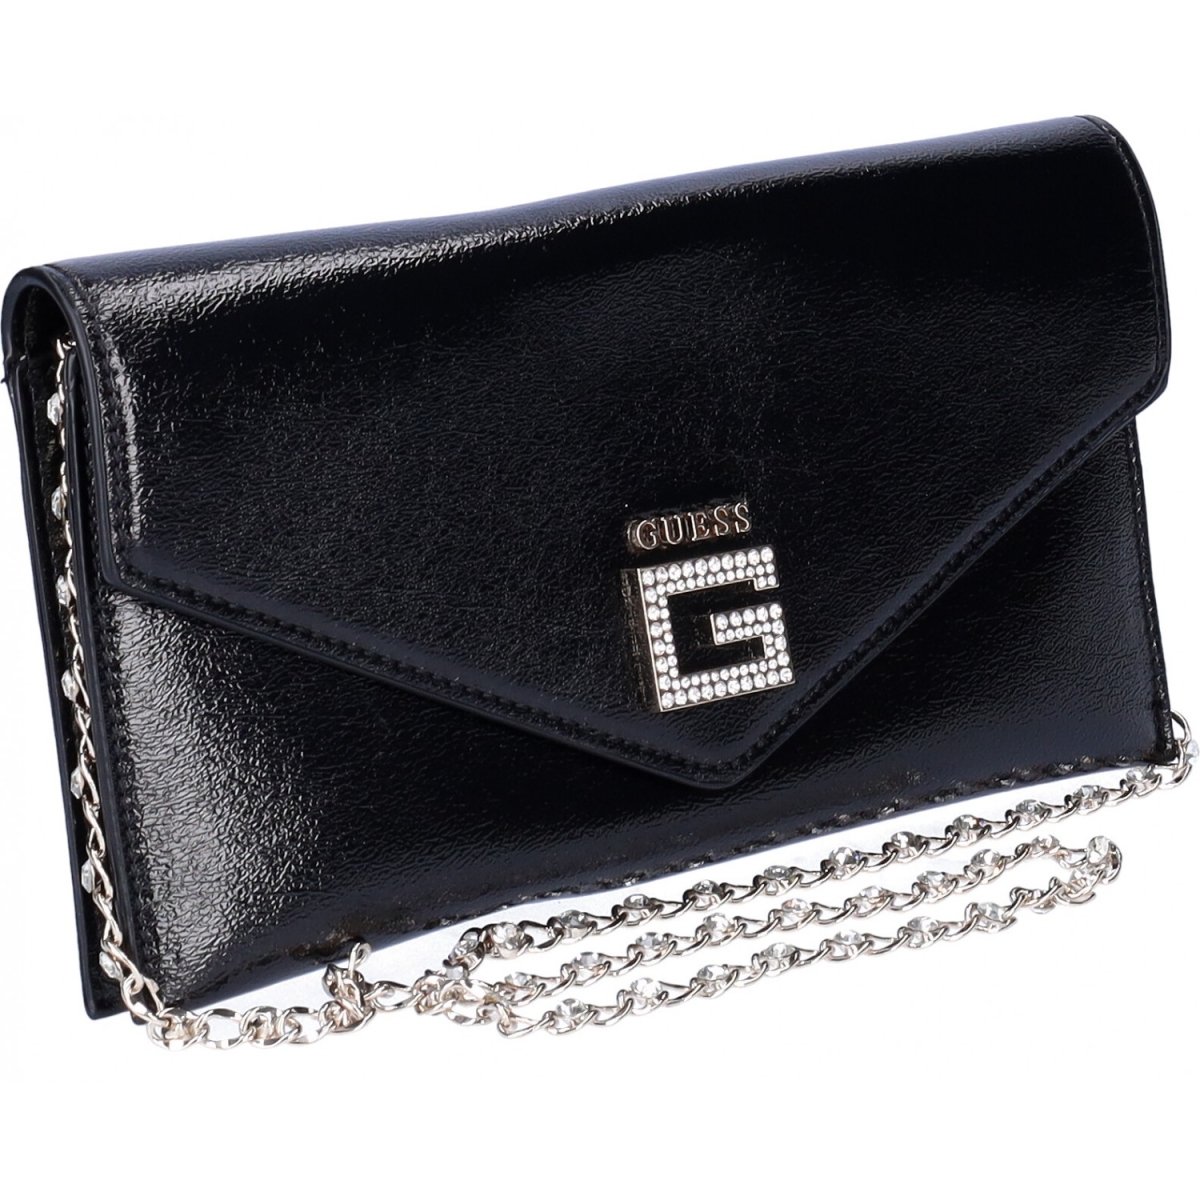 GUESS EVER MINI PARTYTIME BLACK